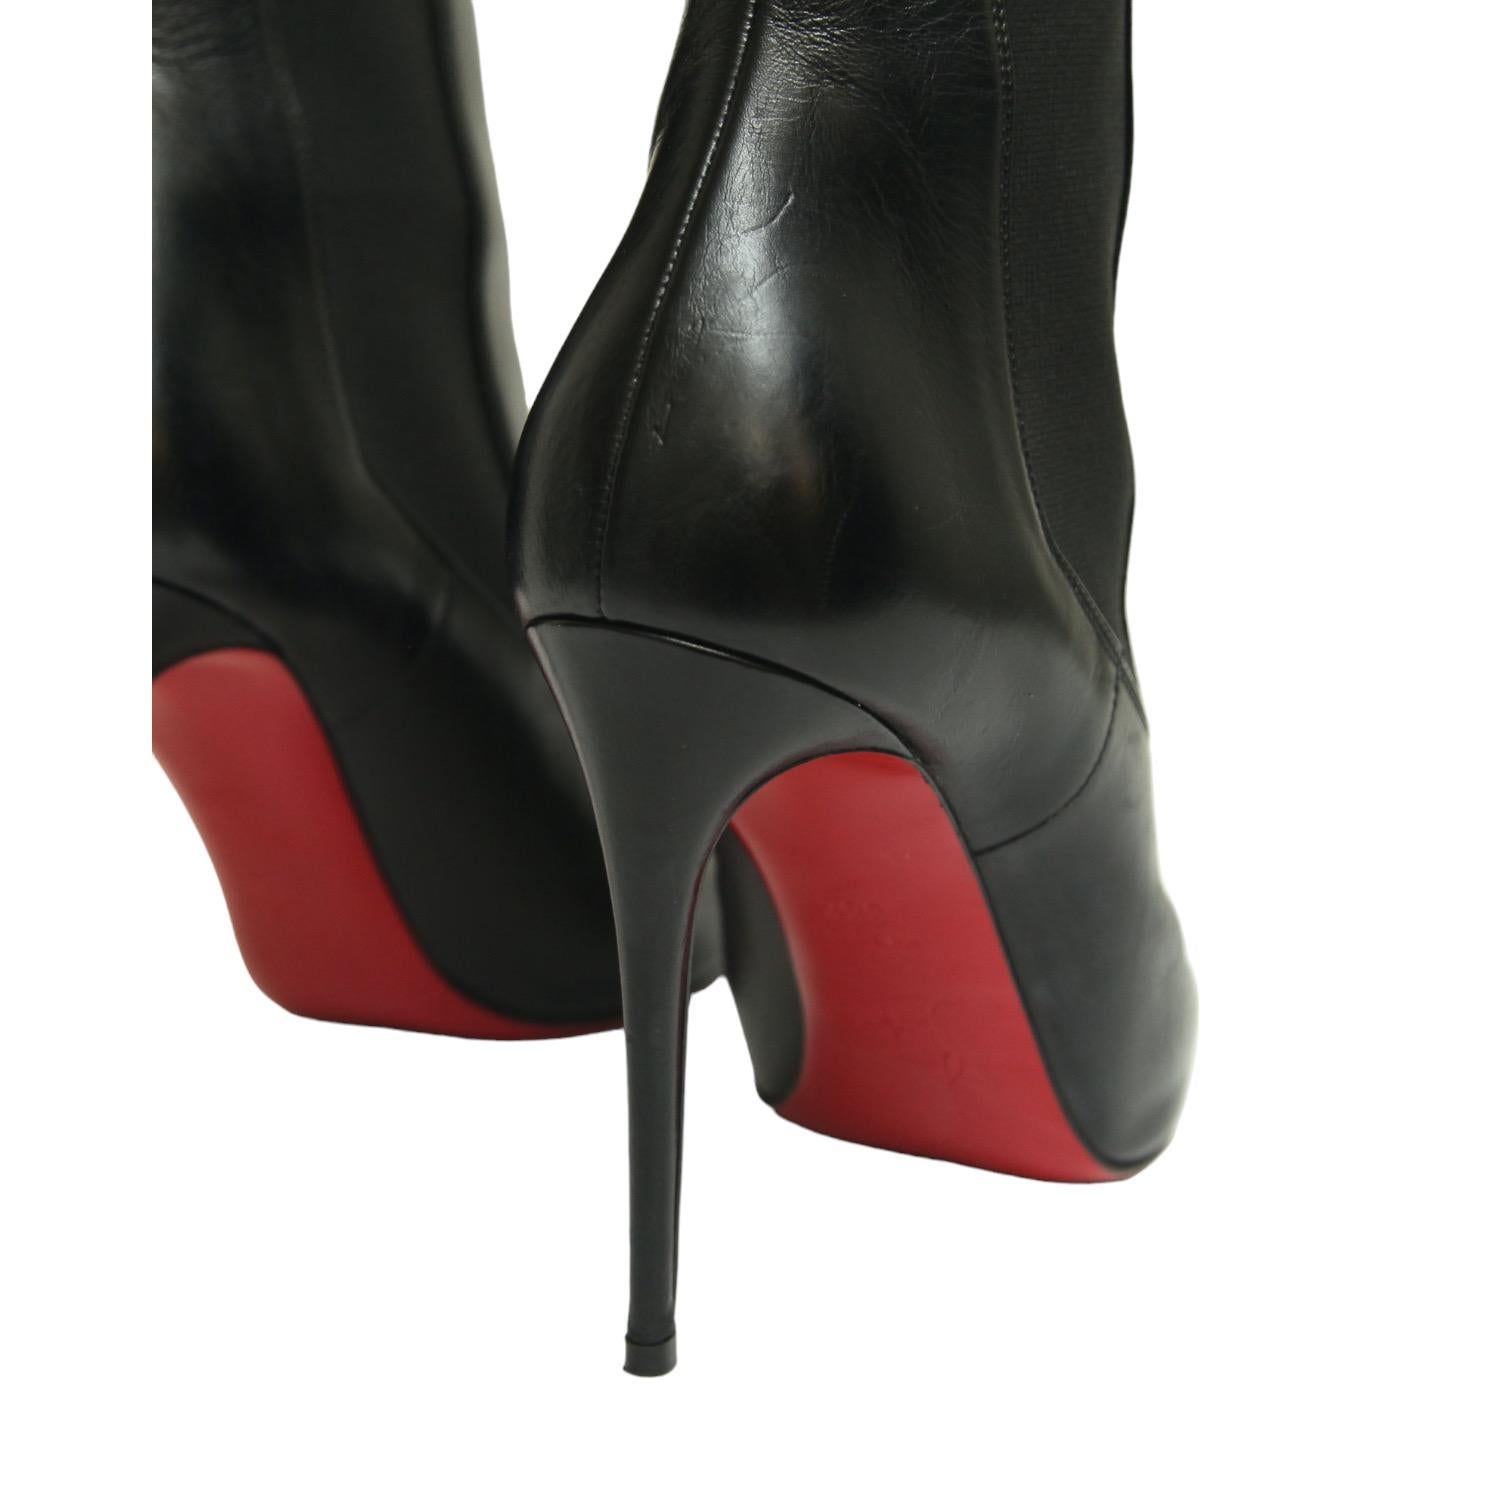 CHRISTIAN LOUBOUTIN Black Leather Bootie BANJO Ankle Boot Spiked Cap Toe 38.5 For Sale 3